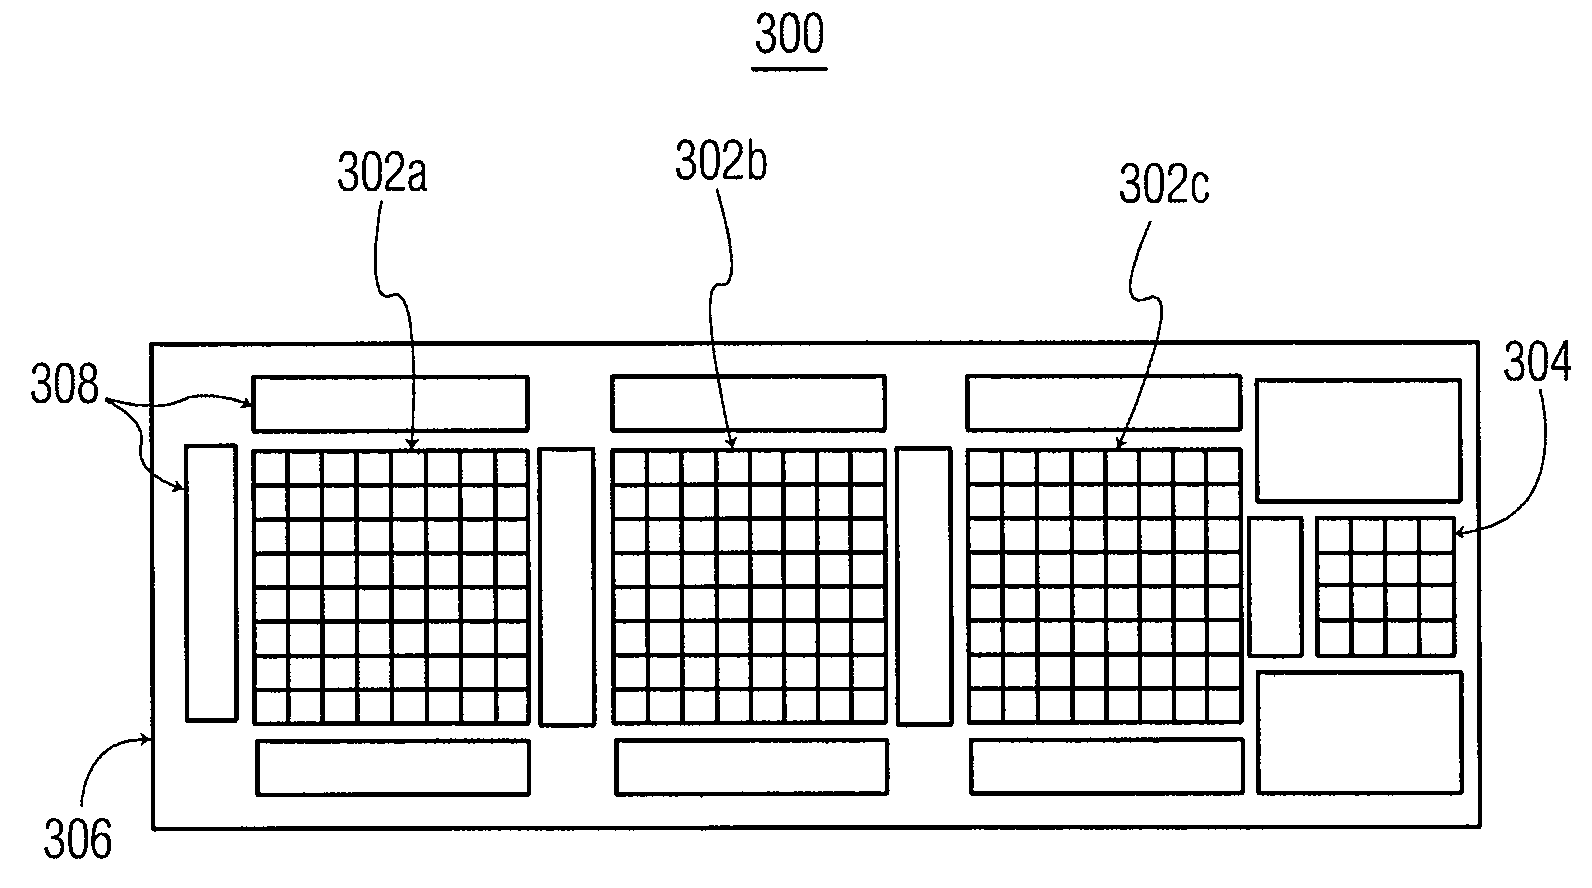 Multi-array sensor with integrated sub-array for parallax detection and photometer functionality